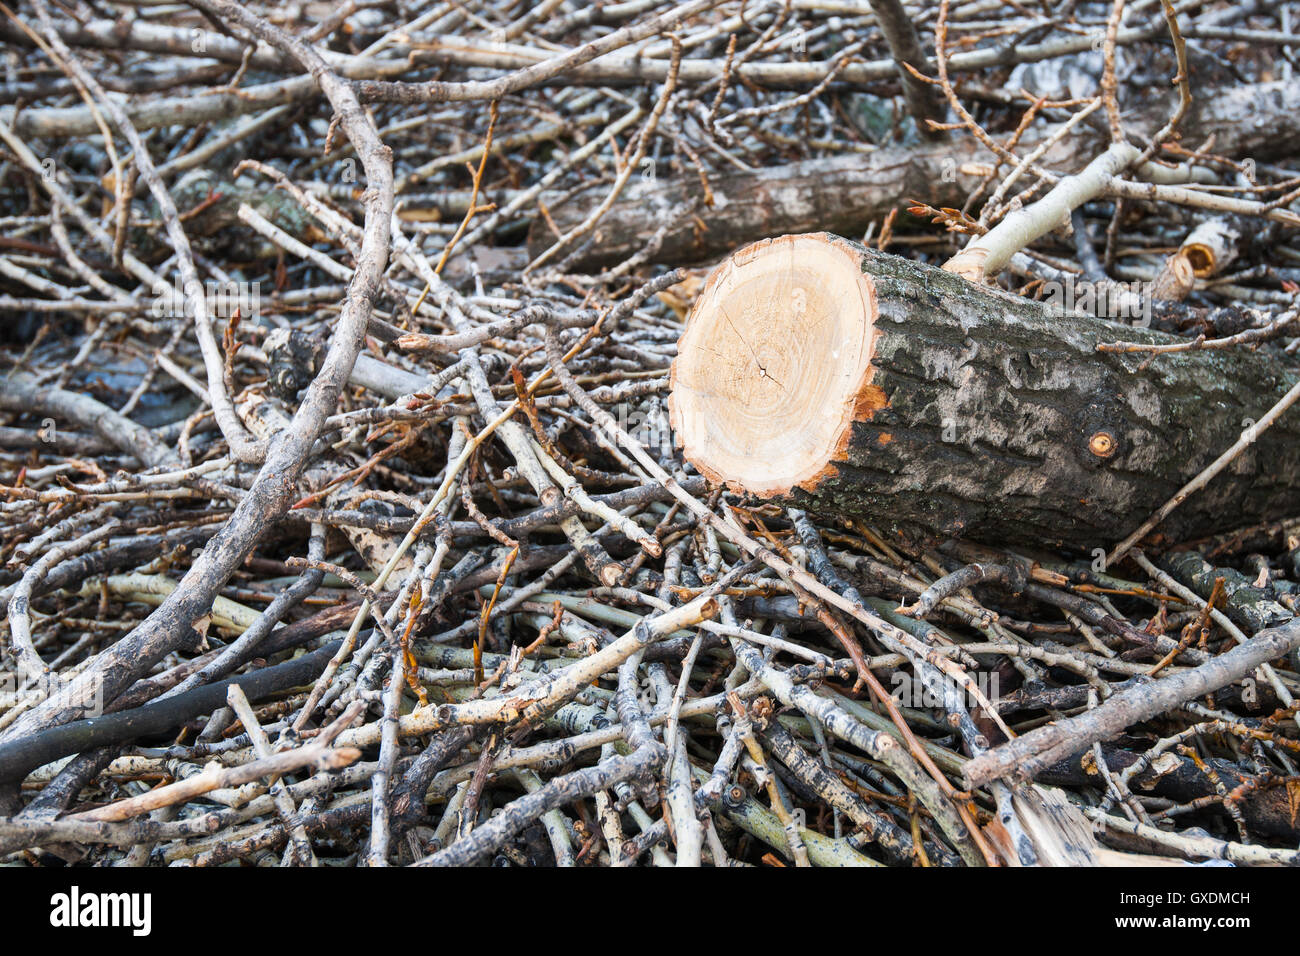 Pile of brushwood. Cuts of tree branches and twigs. Closeup view, nobody around, autumn theme. Stock Photo